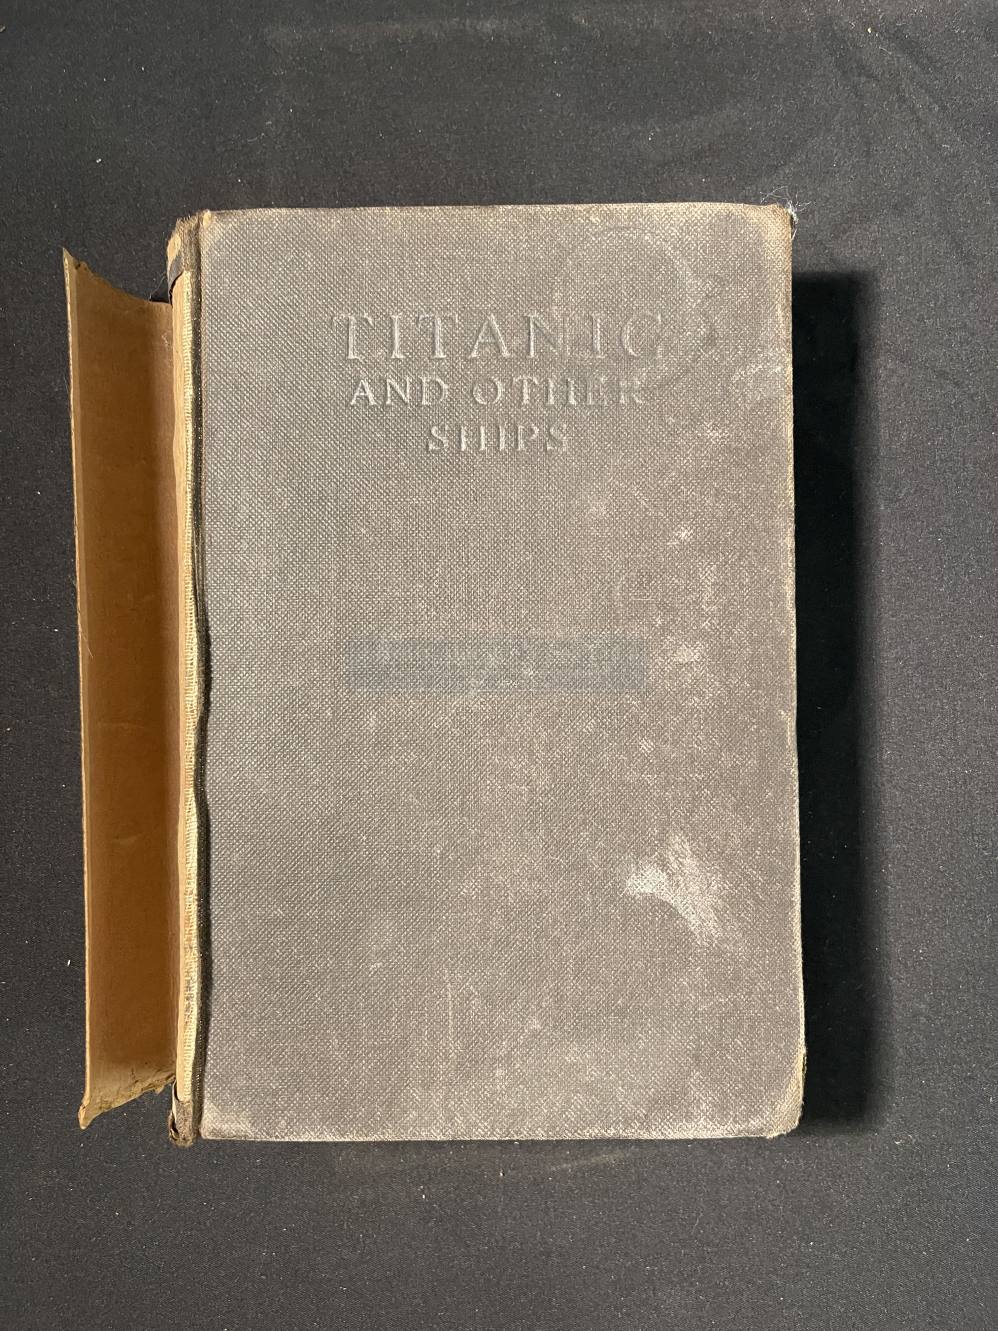 R.M.S. TITANIC: 1935 first edition of Titanic and Other Ships, loose spine.